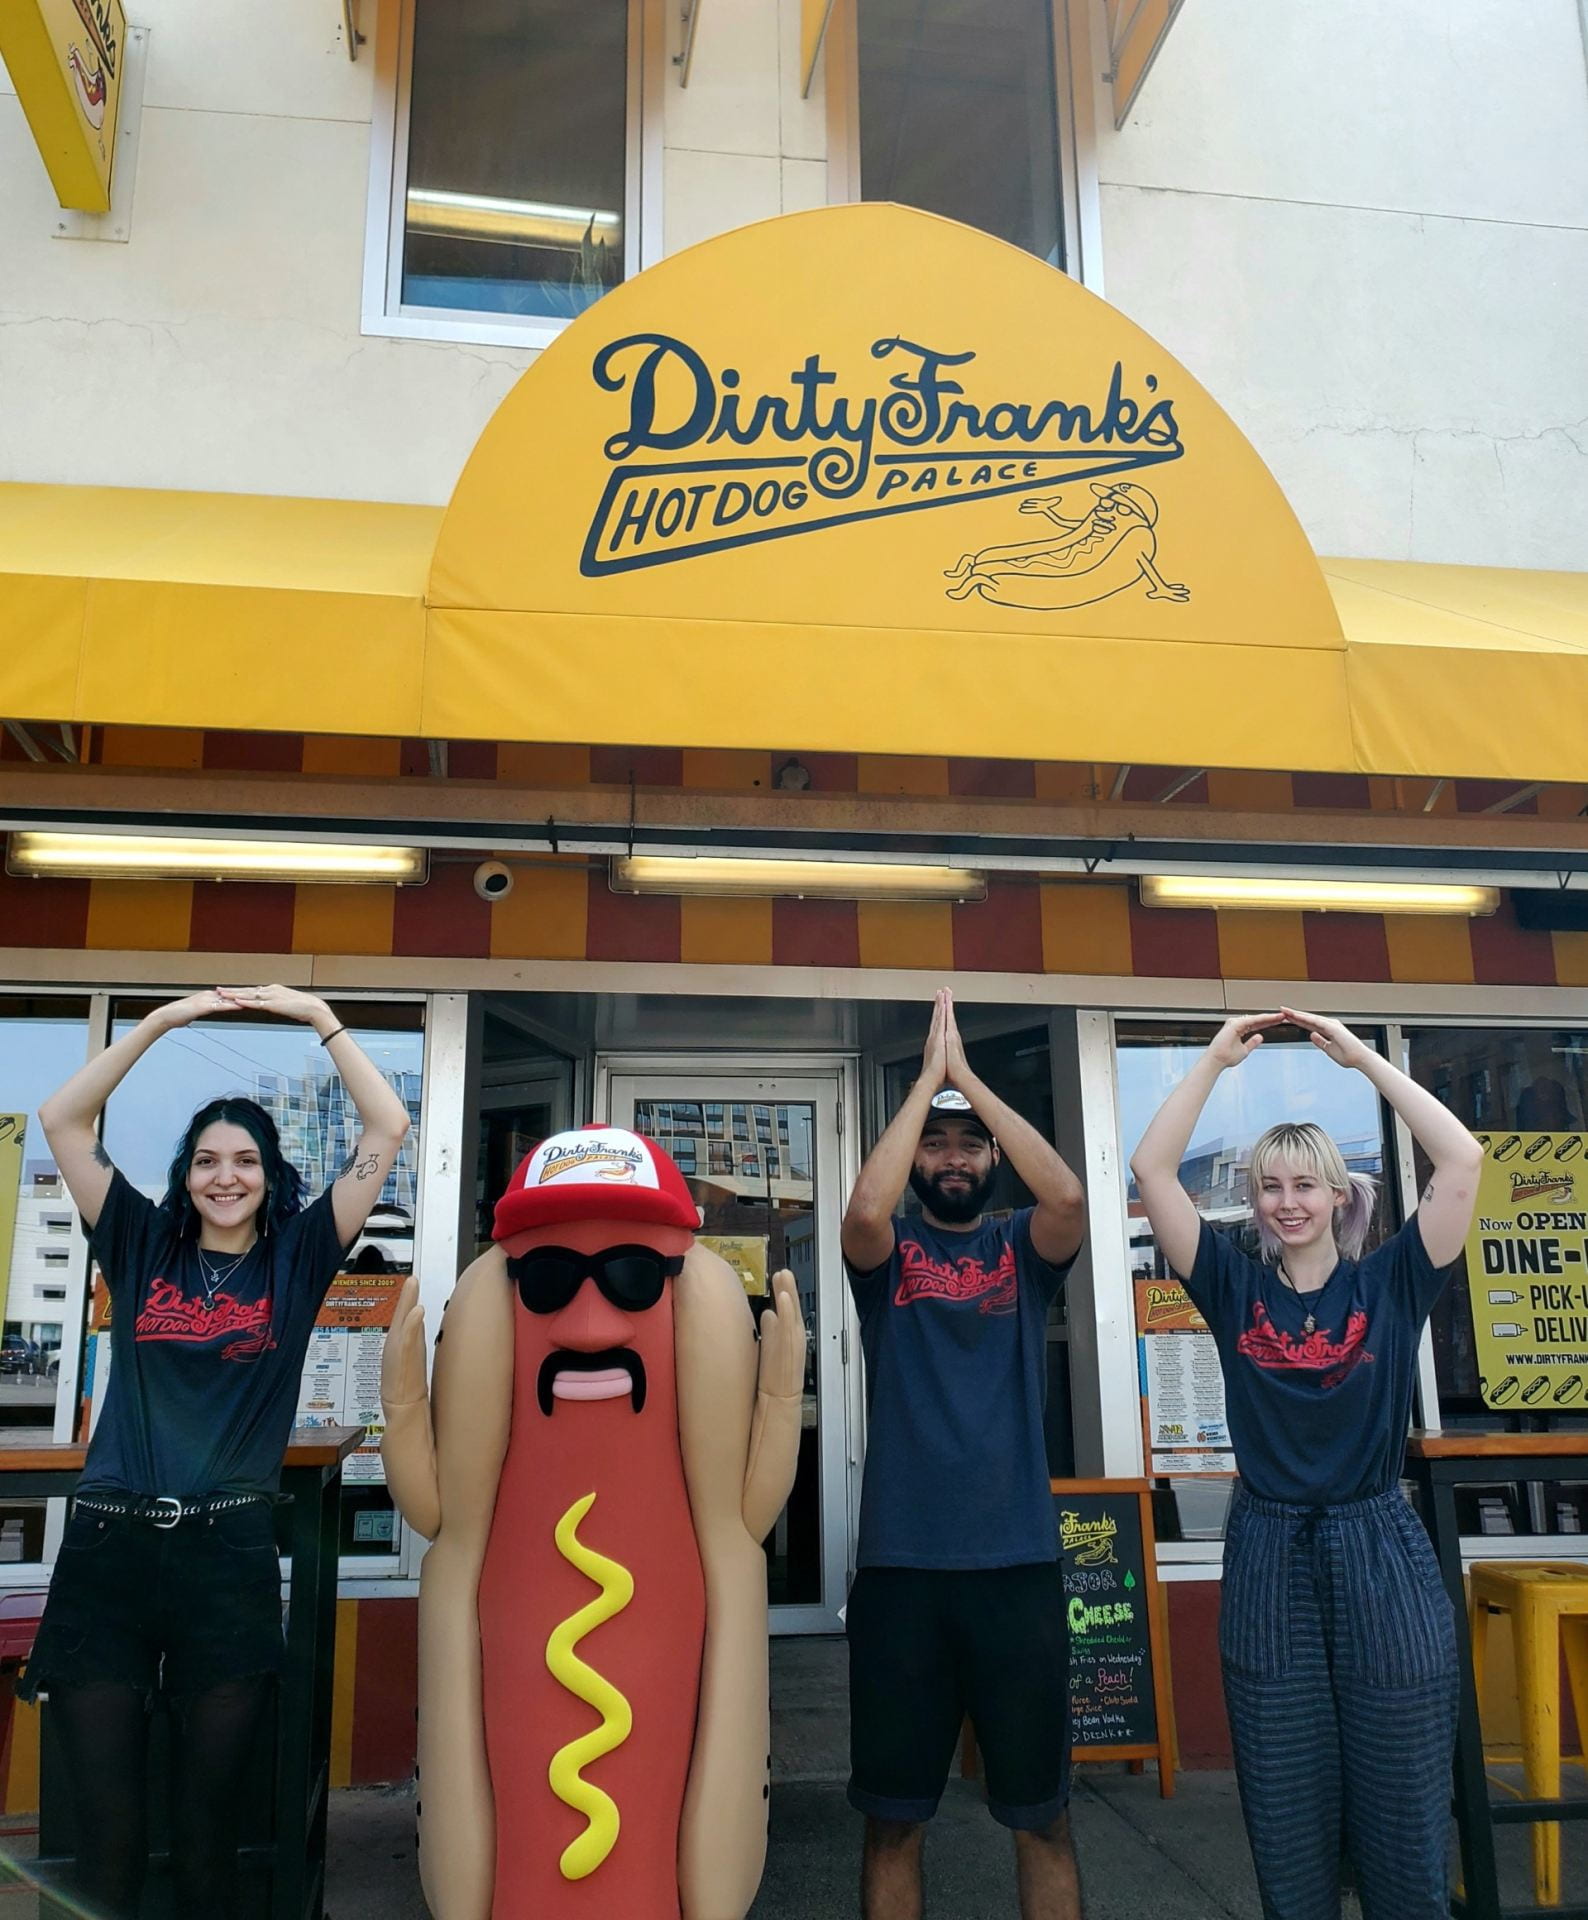 Dirty Frank’s Hot Dog Palace employees, along with the company mascot, partake in a well-known Ohio State tradition by spelling out “O-H-I-O" in front of one of the company’s numerous locations. Credit: Courtesy of Dirty Frank’s Hot Dog Palace